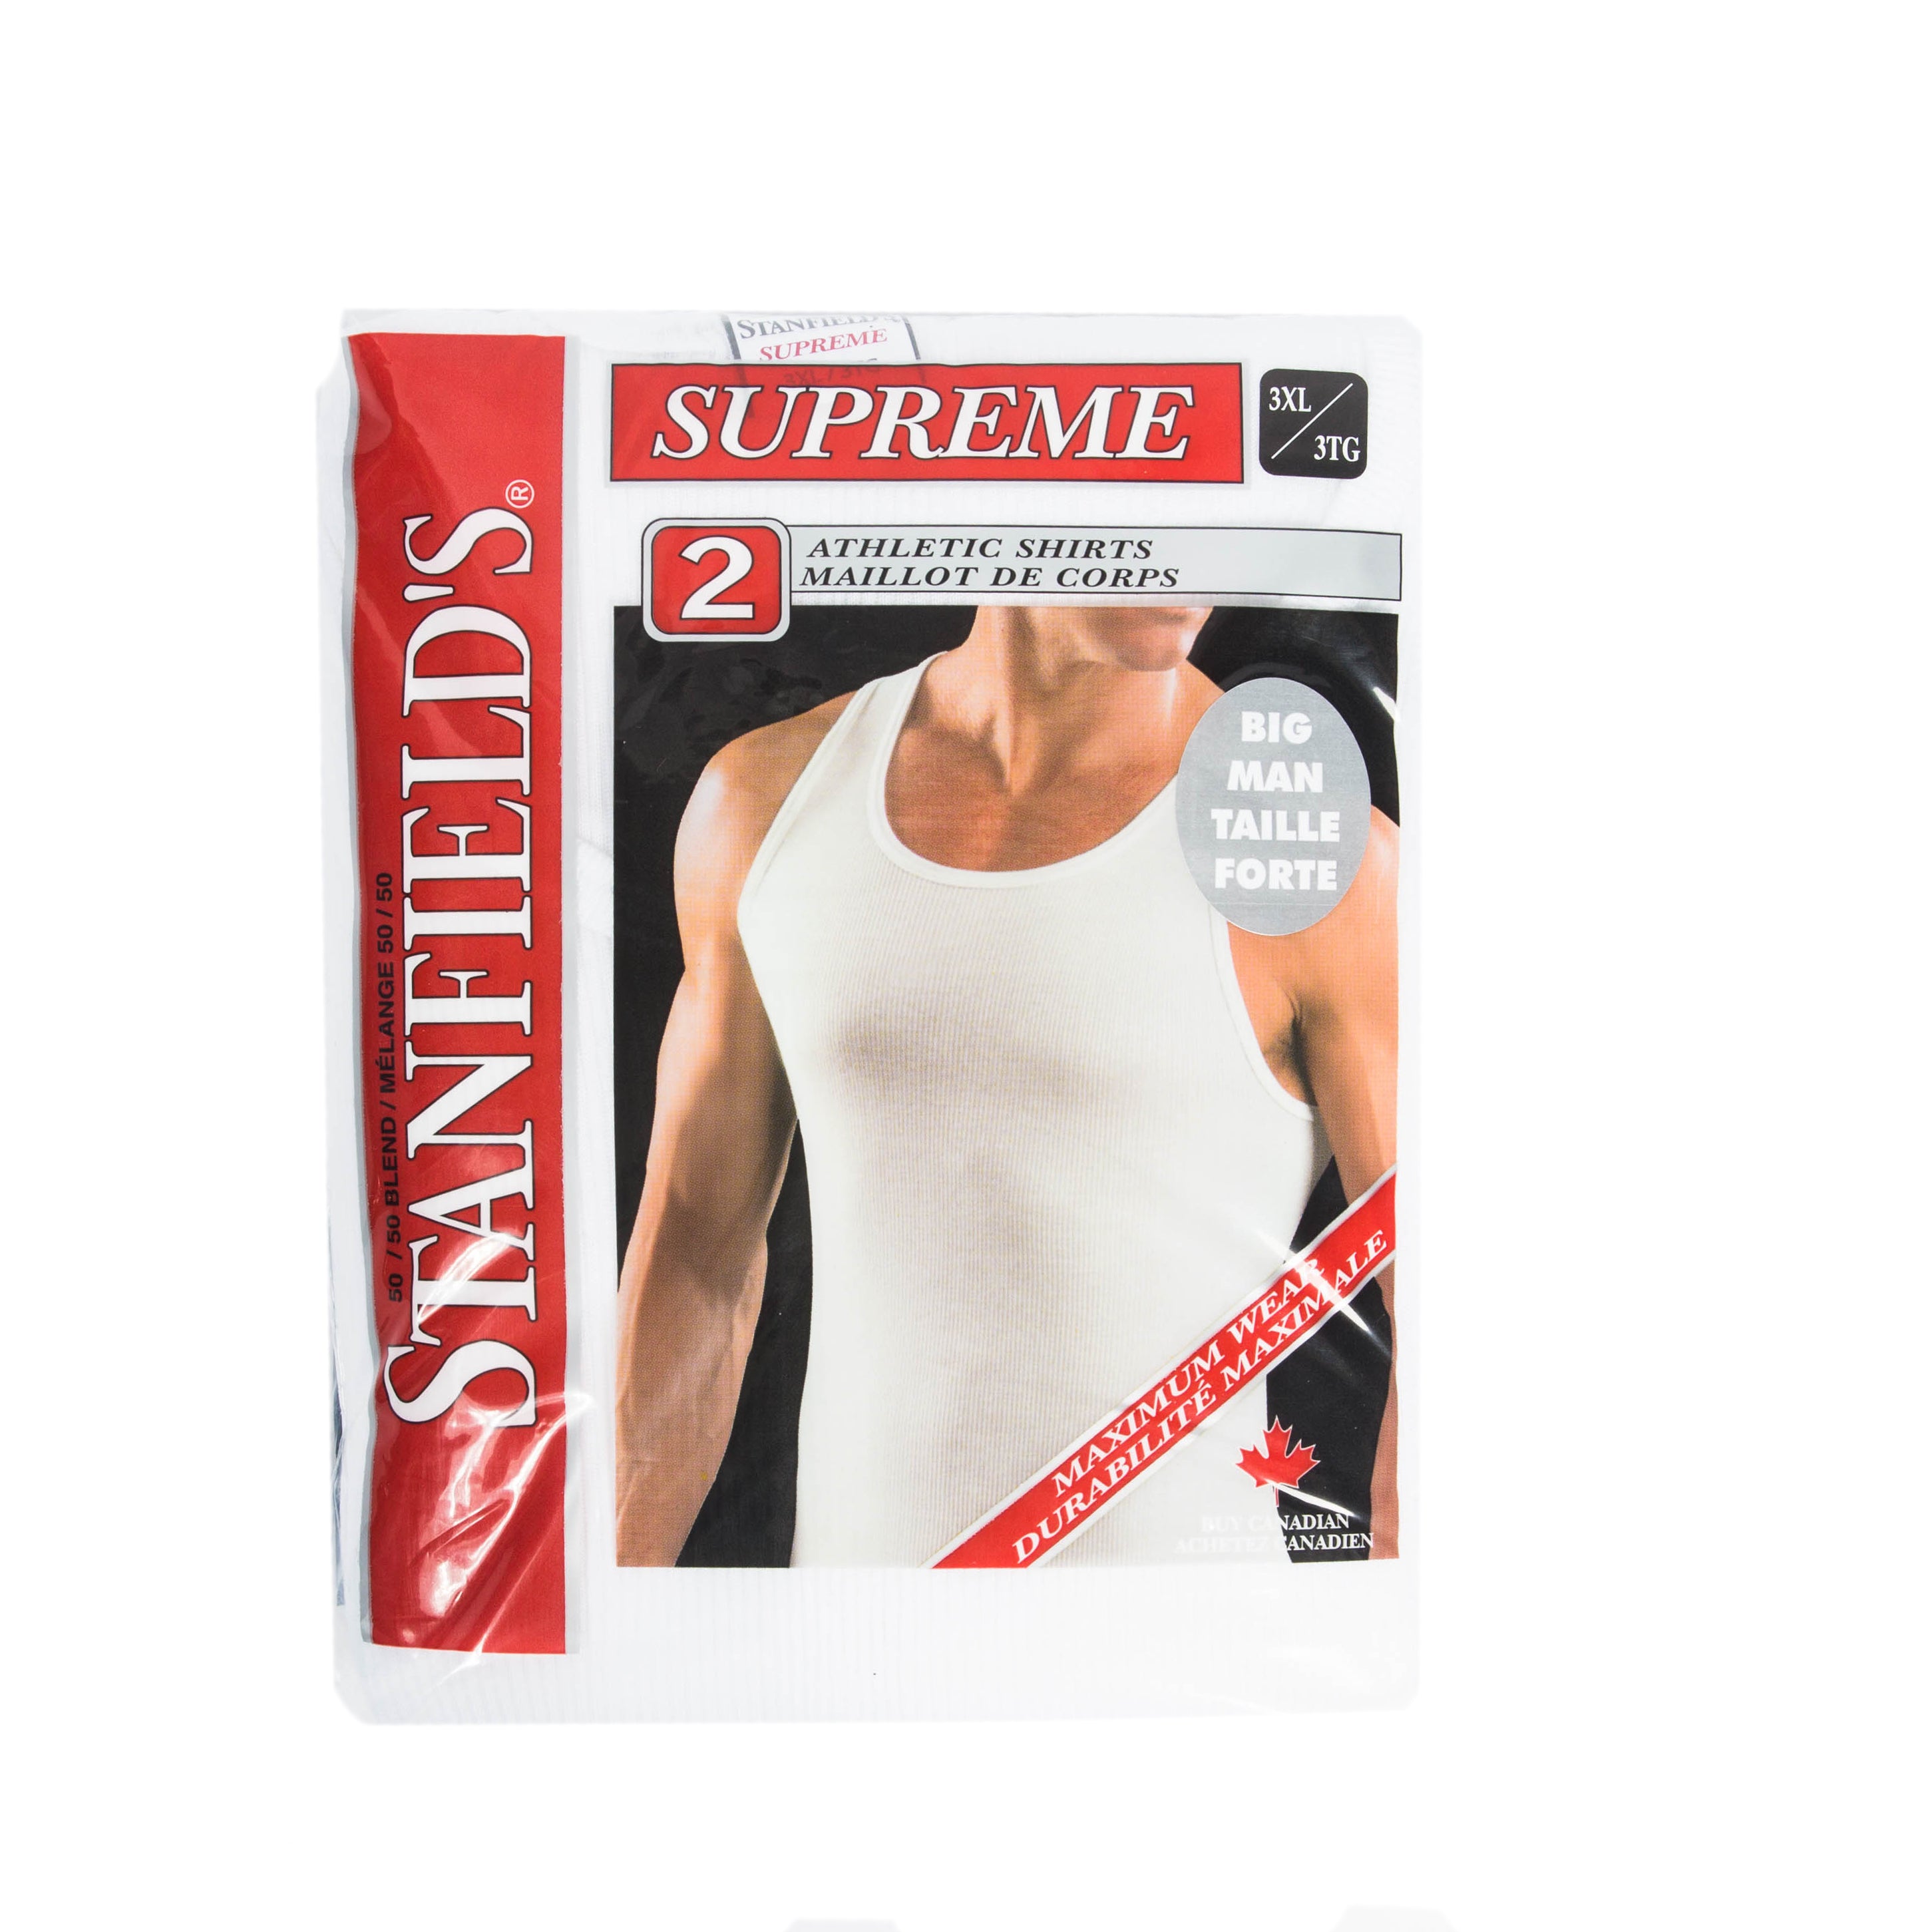 Stanfield's Men's Supreme Cotton Blend Crew Neck Undershirts, Pack of 2